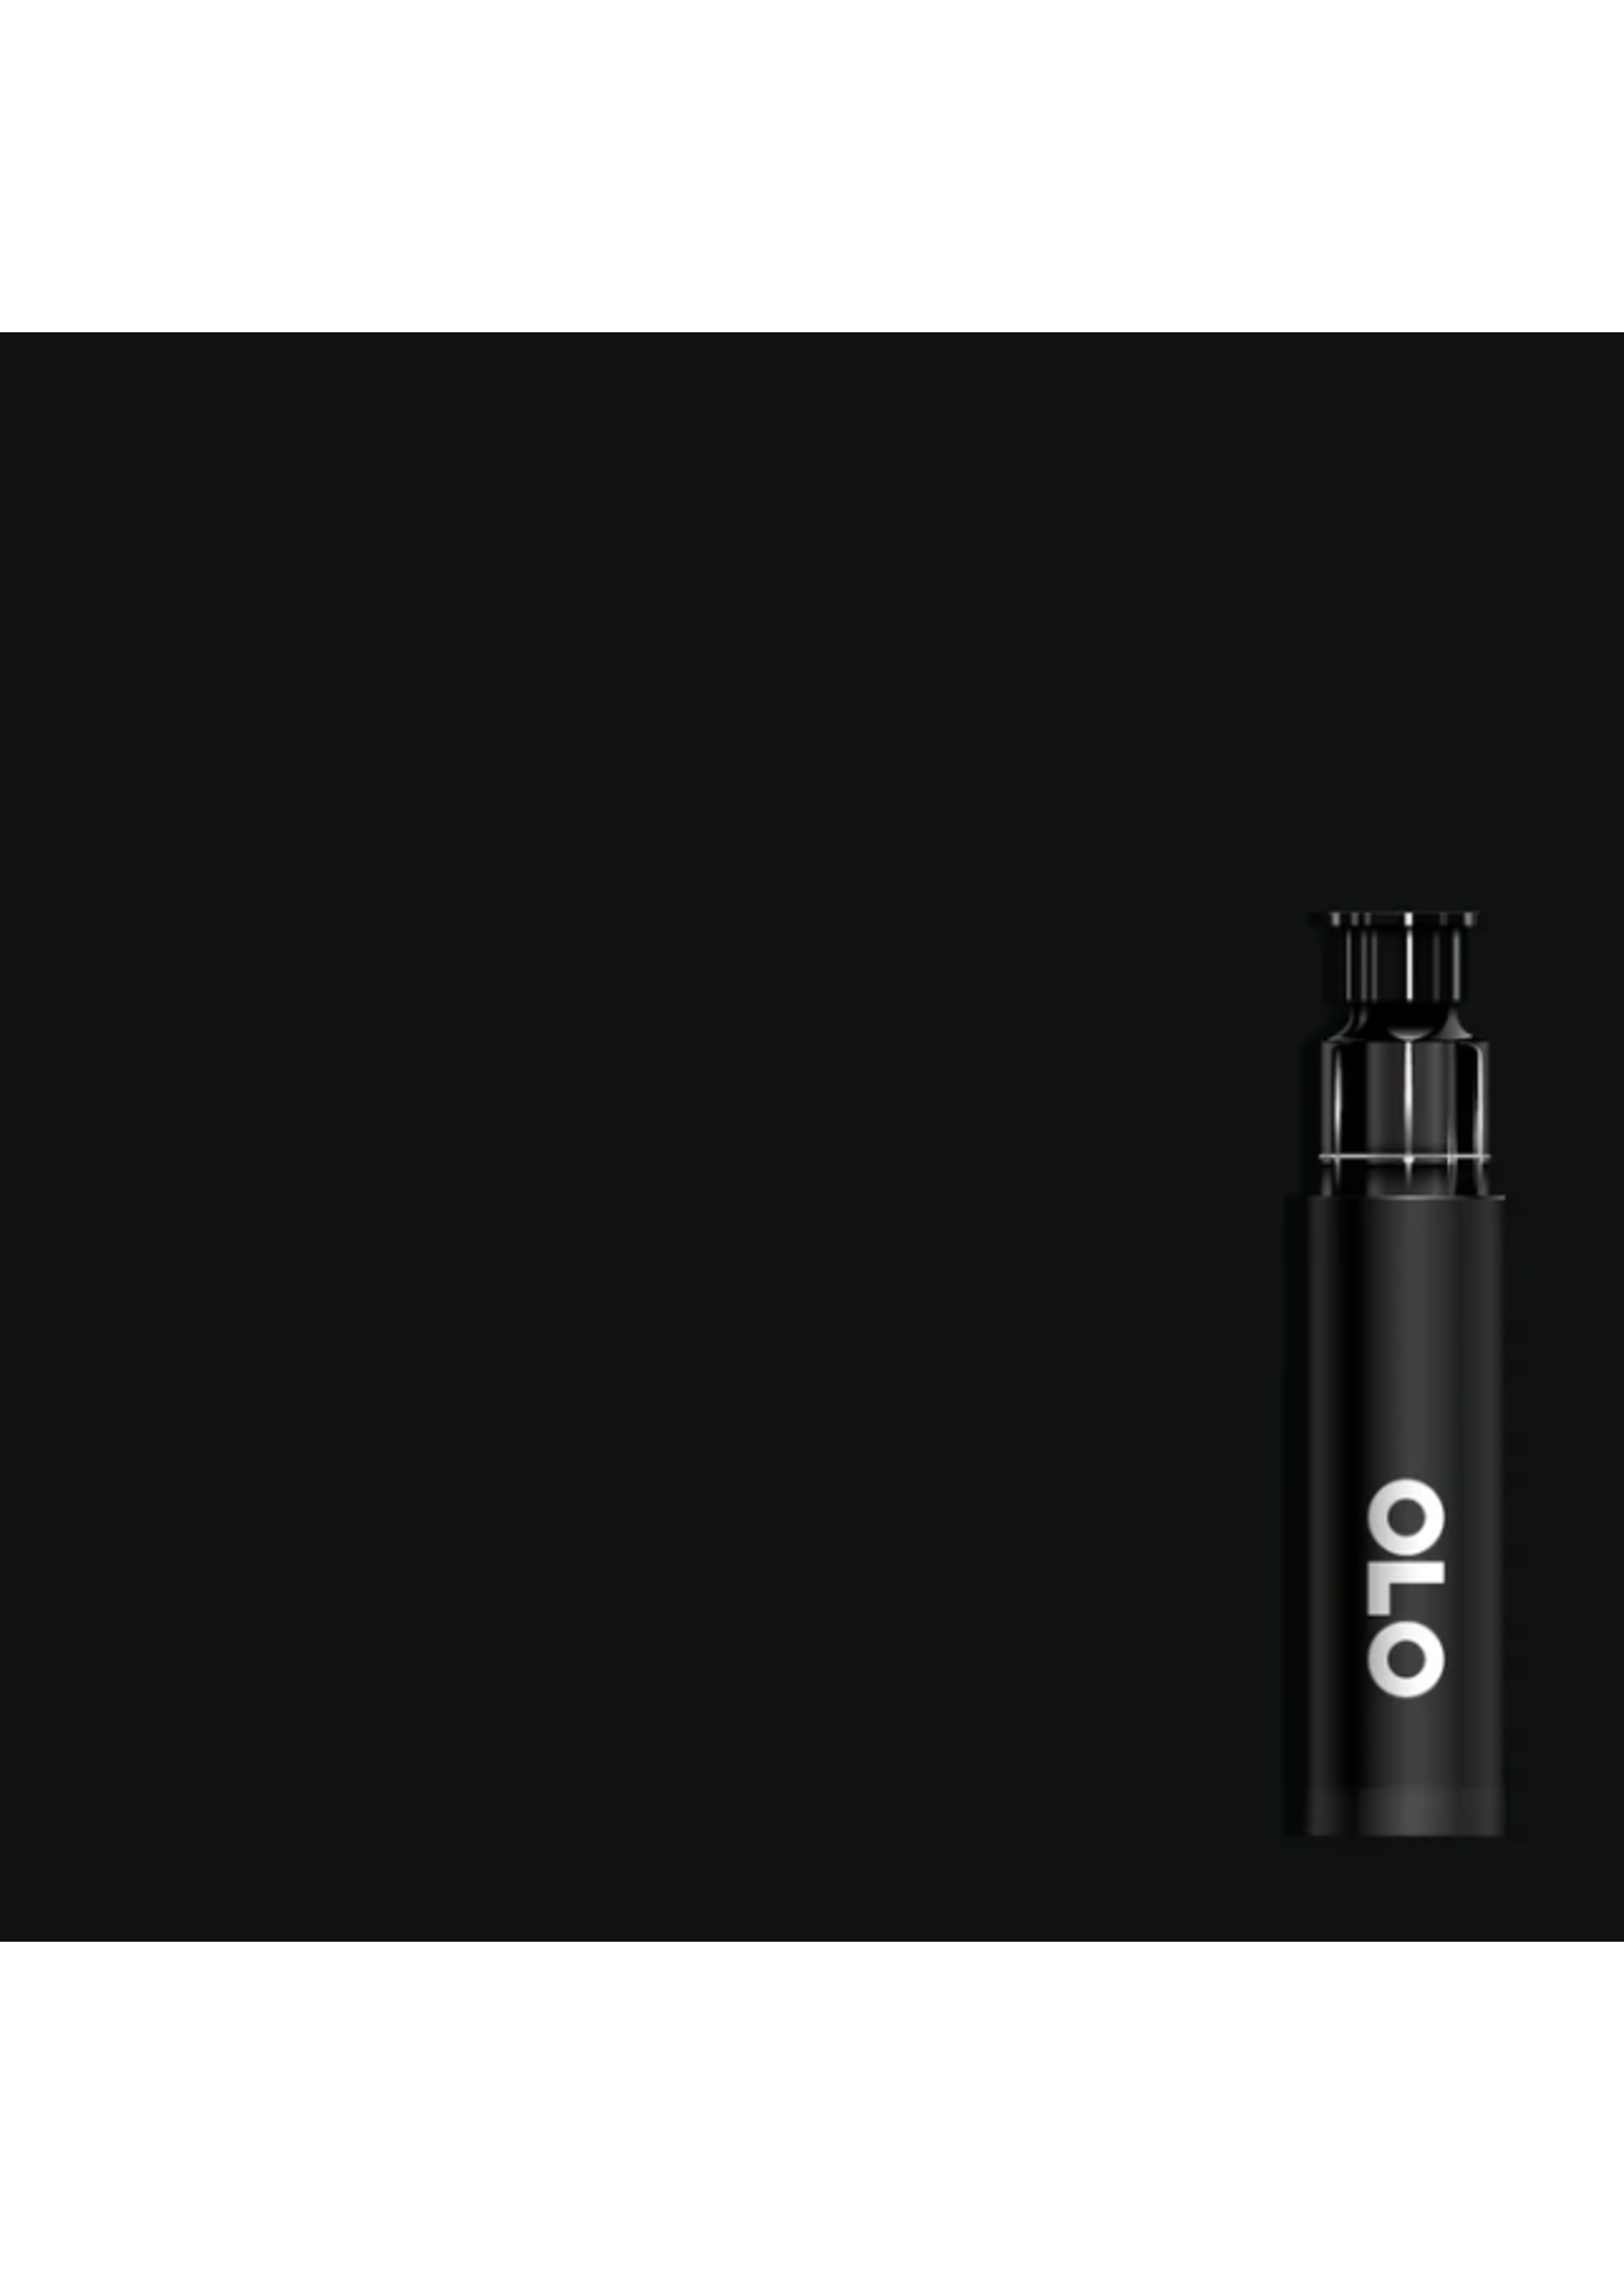 OLO OLO Brush Replacement Cartridge: Cool Gray 9